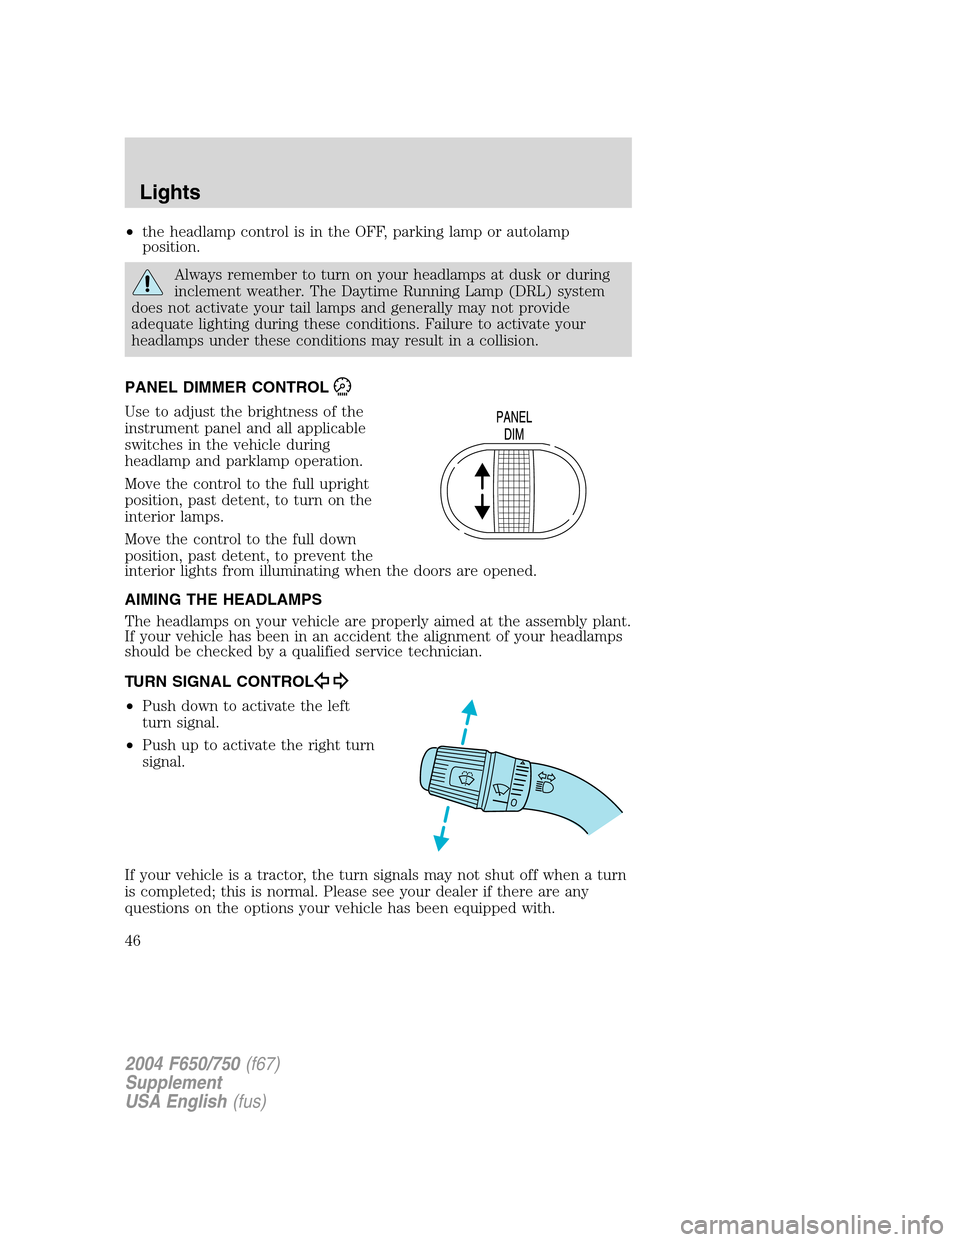 FORD F650 2004 11.G Owners Manual •the headlamp control is in the OFF, parking lamp or autolamp
position.
Always remember to turn on your headlamps at dusk or during
inclement weather. The Daytime Running Lamp (DRL) system
does not 